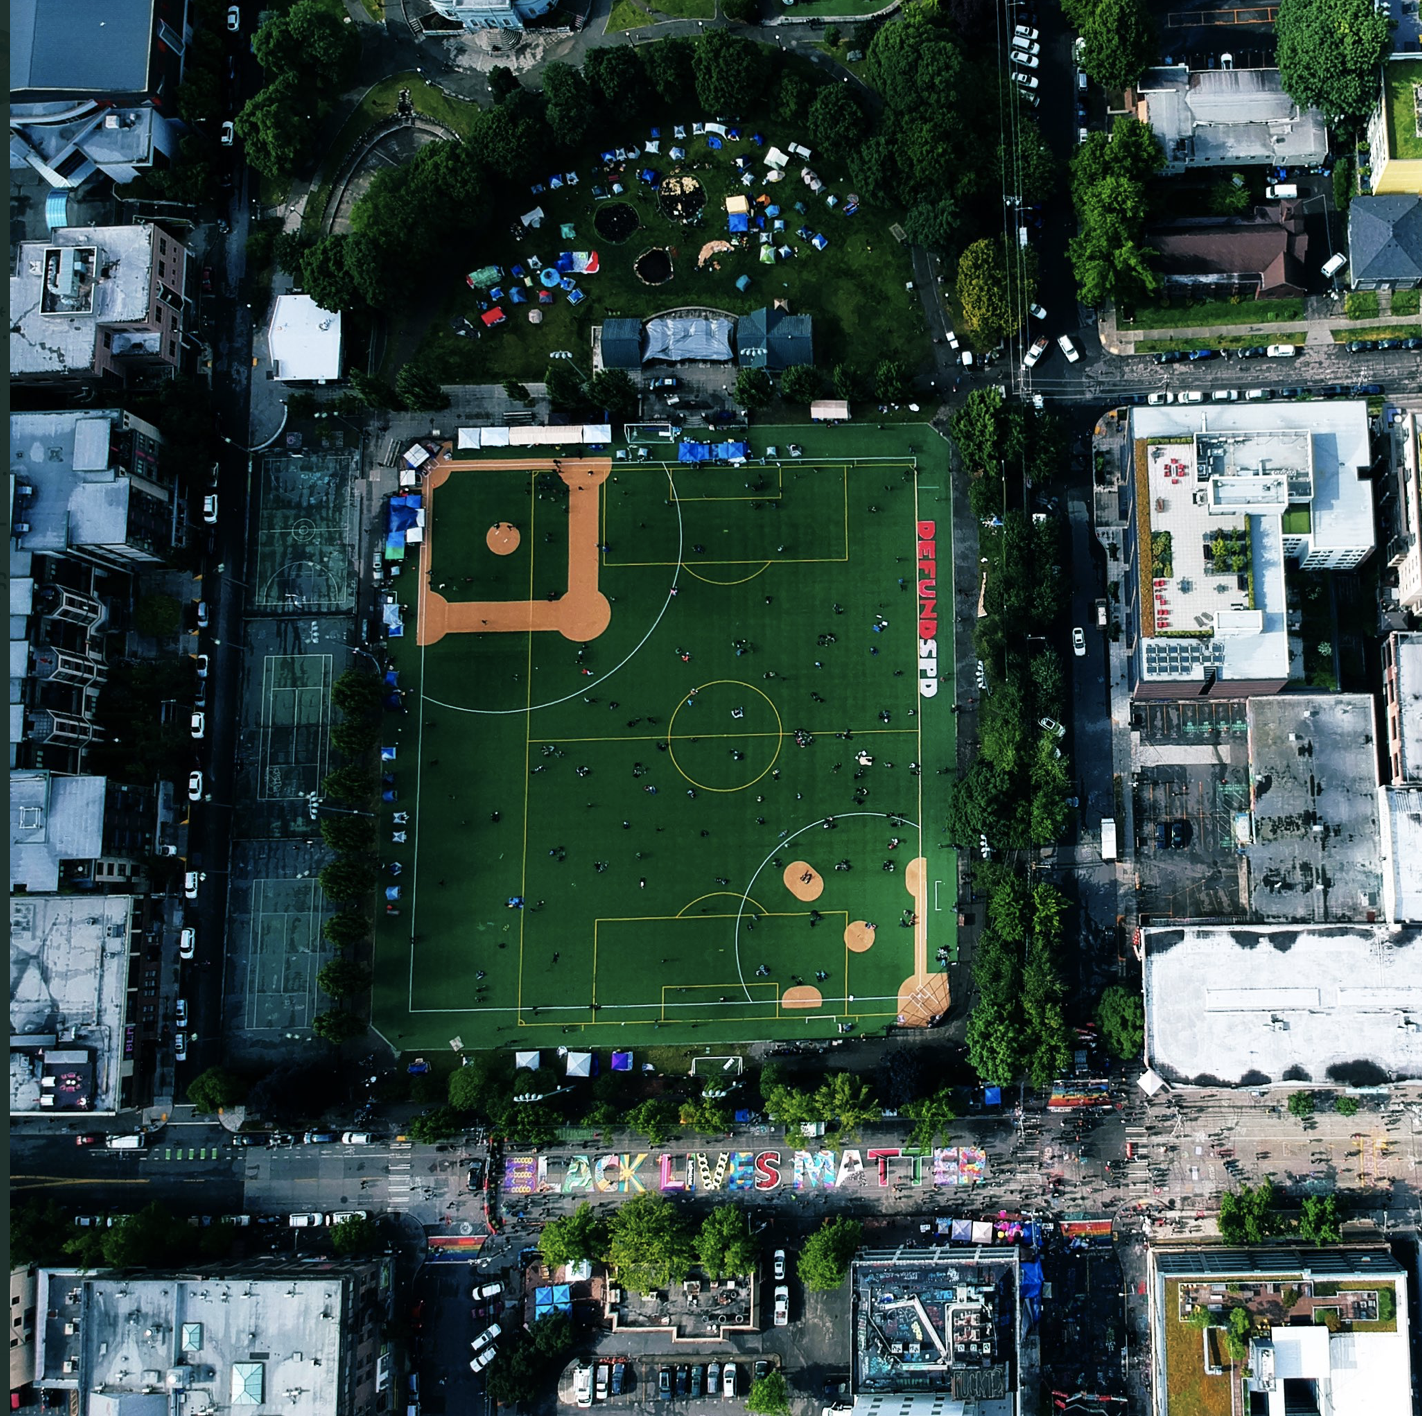 An aerial view of CHAZ after being taken over by protesters shows tents inside the park and a large mural on street. (Credit: Richie McGinniss)